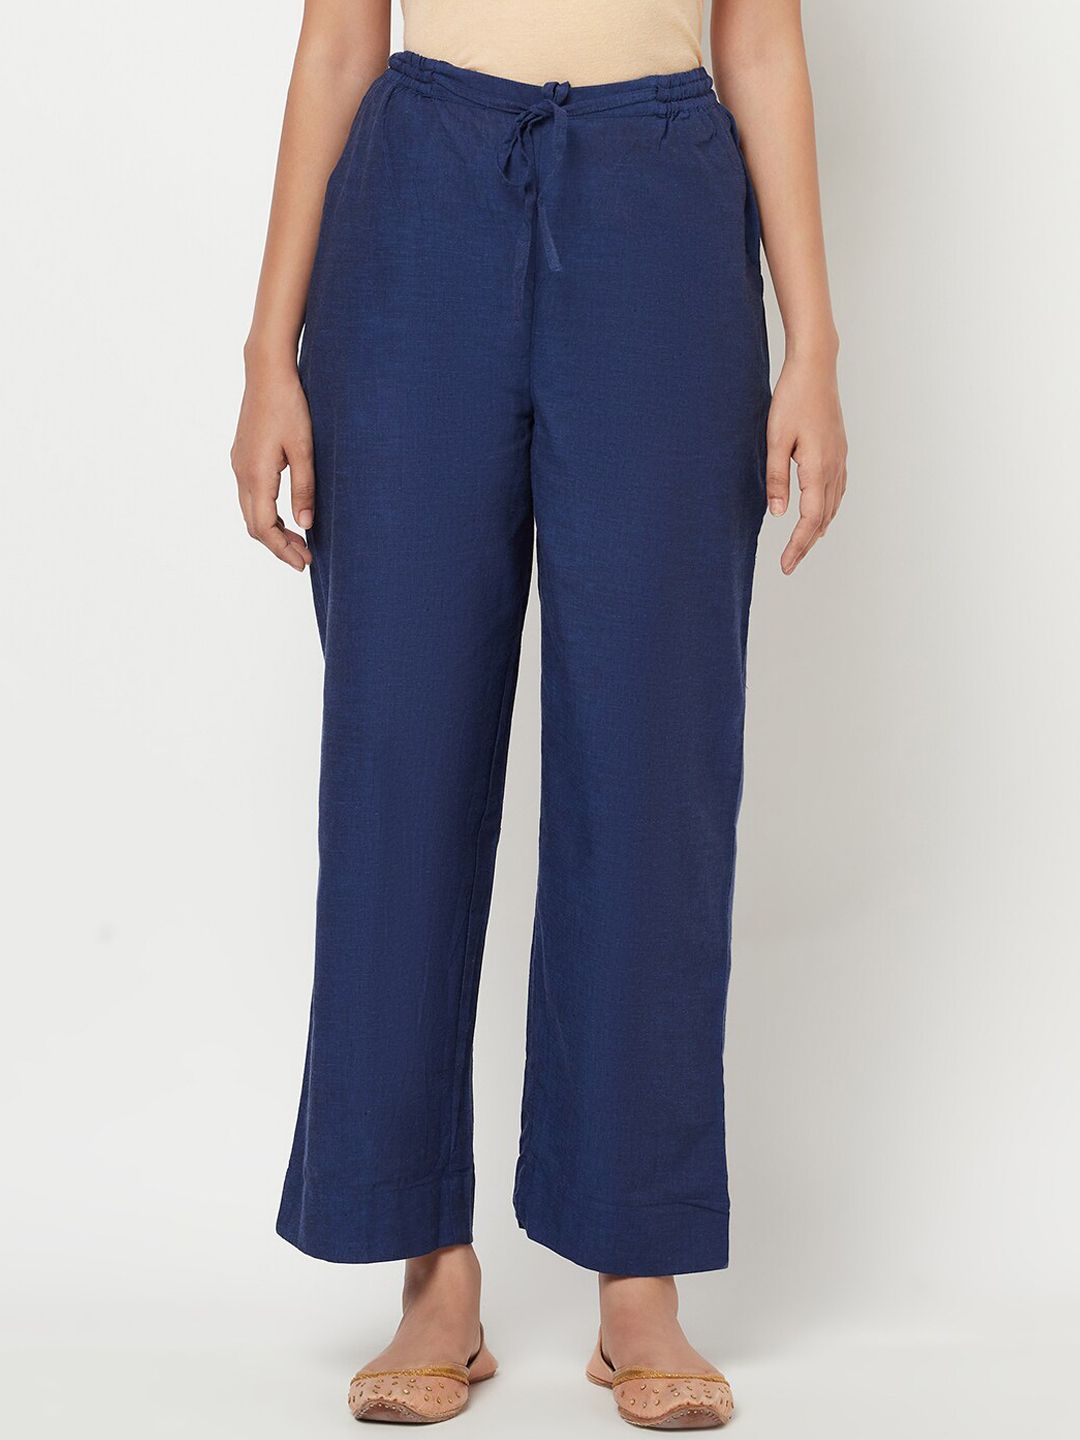 Fabindia Women Navy Blue Solid Trousers Price in India